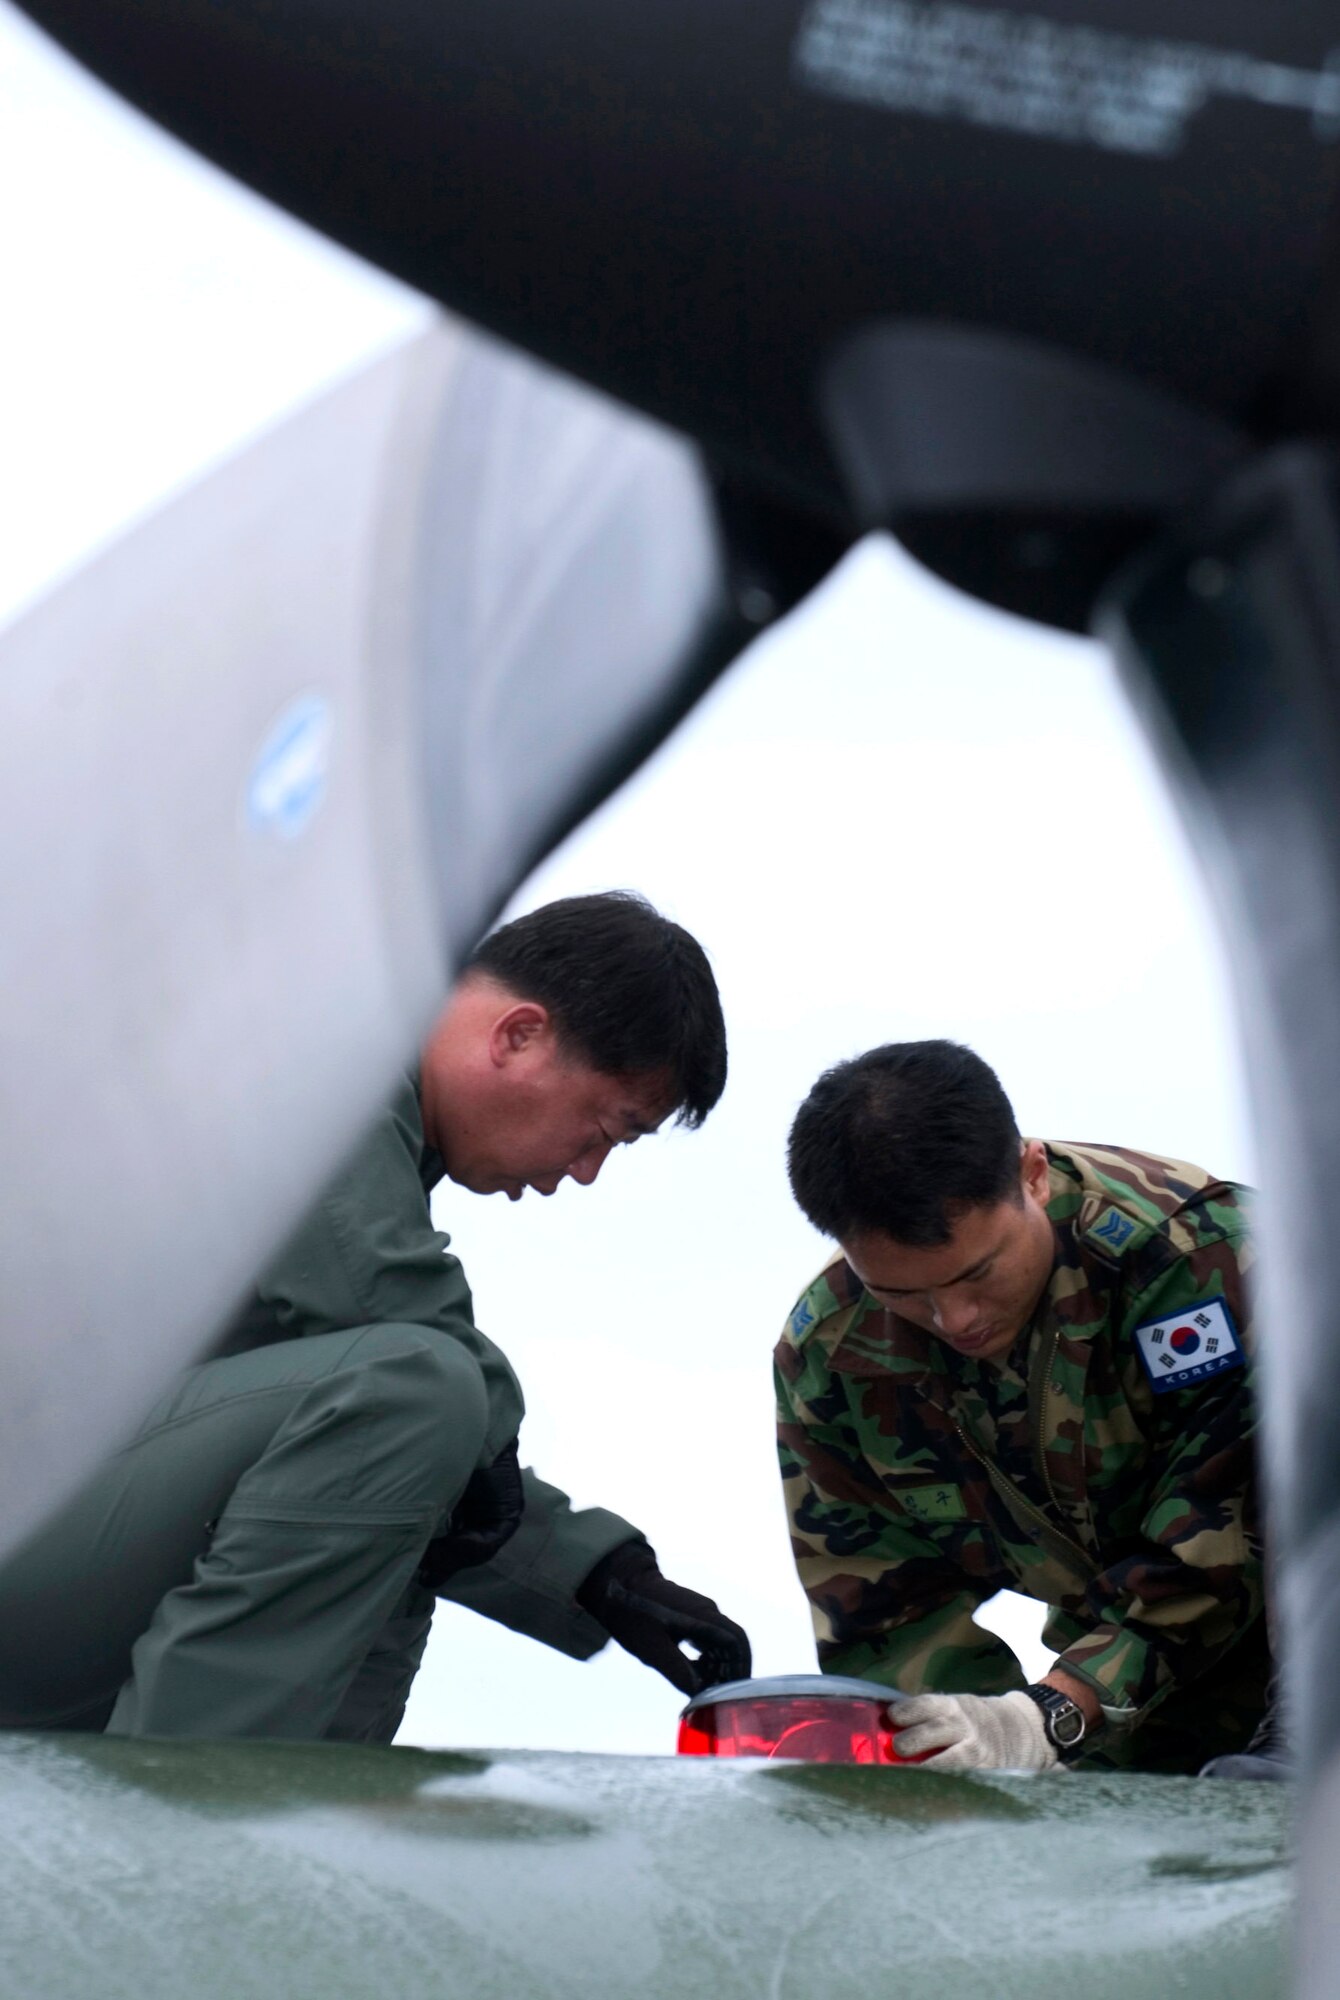 Chief Master Sgt. Jongkyu Lee and Master Sgt. Jinkoo Kim repair an anti-collision lamp on a C-130 Hercules at Elmendorf Air Force Base, Alaska, on July 25. They are members of the Korean air force and are participating in Cooperative Cope Thunder, a Pacific Air Forces exercise that ends Aug. 5. (U.S. Air Force photo/Senior Airman Garrett Hothan) 